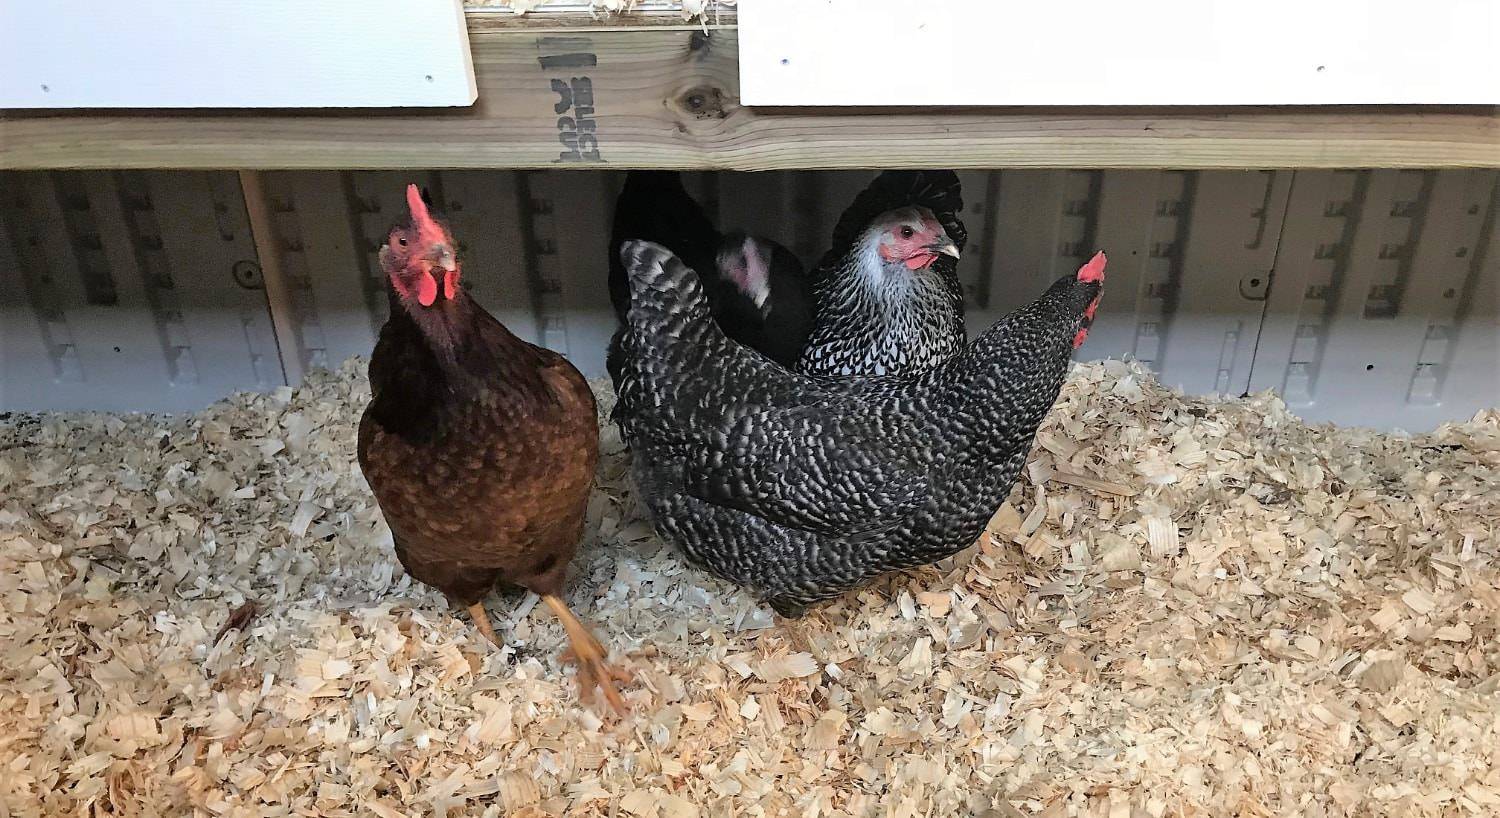 Brown and black chickens walking on tan wood chips in a chicken coop